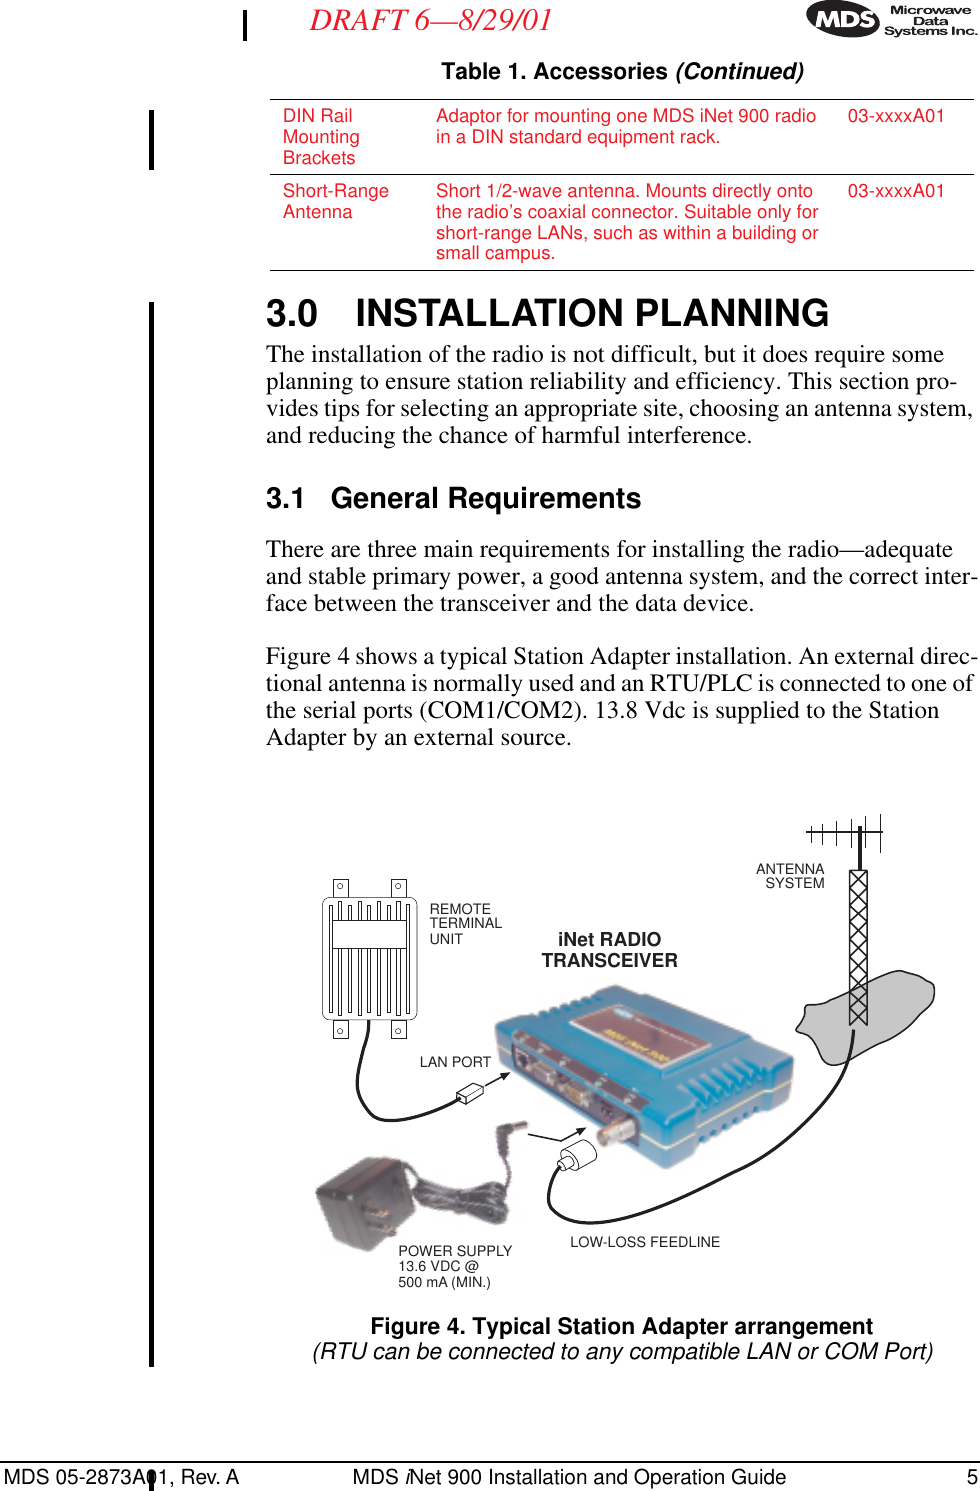  MDS 05-2873A01, Rev. A MDS  i Net 900 Installation and Operation Guide 5 DRAFT 6—8/29/01 3.0 INSTALLATION PLANNING The installation of the radio is not difficult, but it does require some planning to ensure station reliability and efficiency. This section pro-vides tips for selecting an appropriate site, choosing an antenna system, and reducing the chance of harmful interference. 3.1 General Requirements There are three main requirements for installing the radio—adequate and stable primary power, a good antenna system, and the correct inter-face between the transceiver and the data device.Figure 4 shows a typical Station Adapter installation. An external direc-tional antenna is normally used and an RTU/PLC is connected to one of the serial ports (COM1/COM2). 13.8 Vdc is supplied to the Station Adapter by an external source. Invisible place holder Figure 4. Typical Station Adapter arrangement (RTU can be connected to any compatible LAN or COM Port) DIN Rail Mounting BracketsAdaptor for mounting one MDS iNet 900 radio in a DIN standard equipment rack. 03-xxxxA01Short-Range Antenna Short 1/2-wave antenna. Mounts directly onto the radio’s coaxial connector. Suitable only for short-range LANs, such as within a building or small campus.03-xxxxA01 Table 1. Accessories  (Continued)LAN PORTPOWER SUPPLY13.6 VDC @500 mA (MIN.)REMOTETERMINALUNITANTENNASYSTEMLOW-LOSS FEEDLINEiNet RADIOTRANSCEIVER